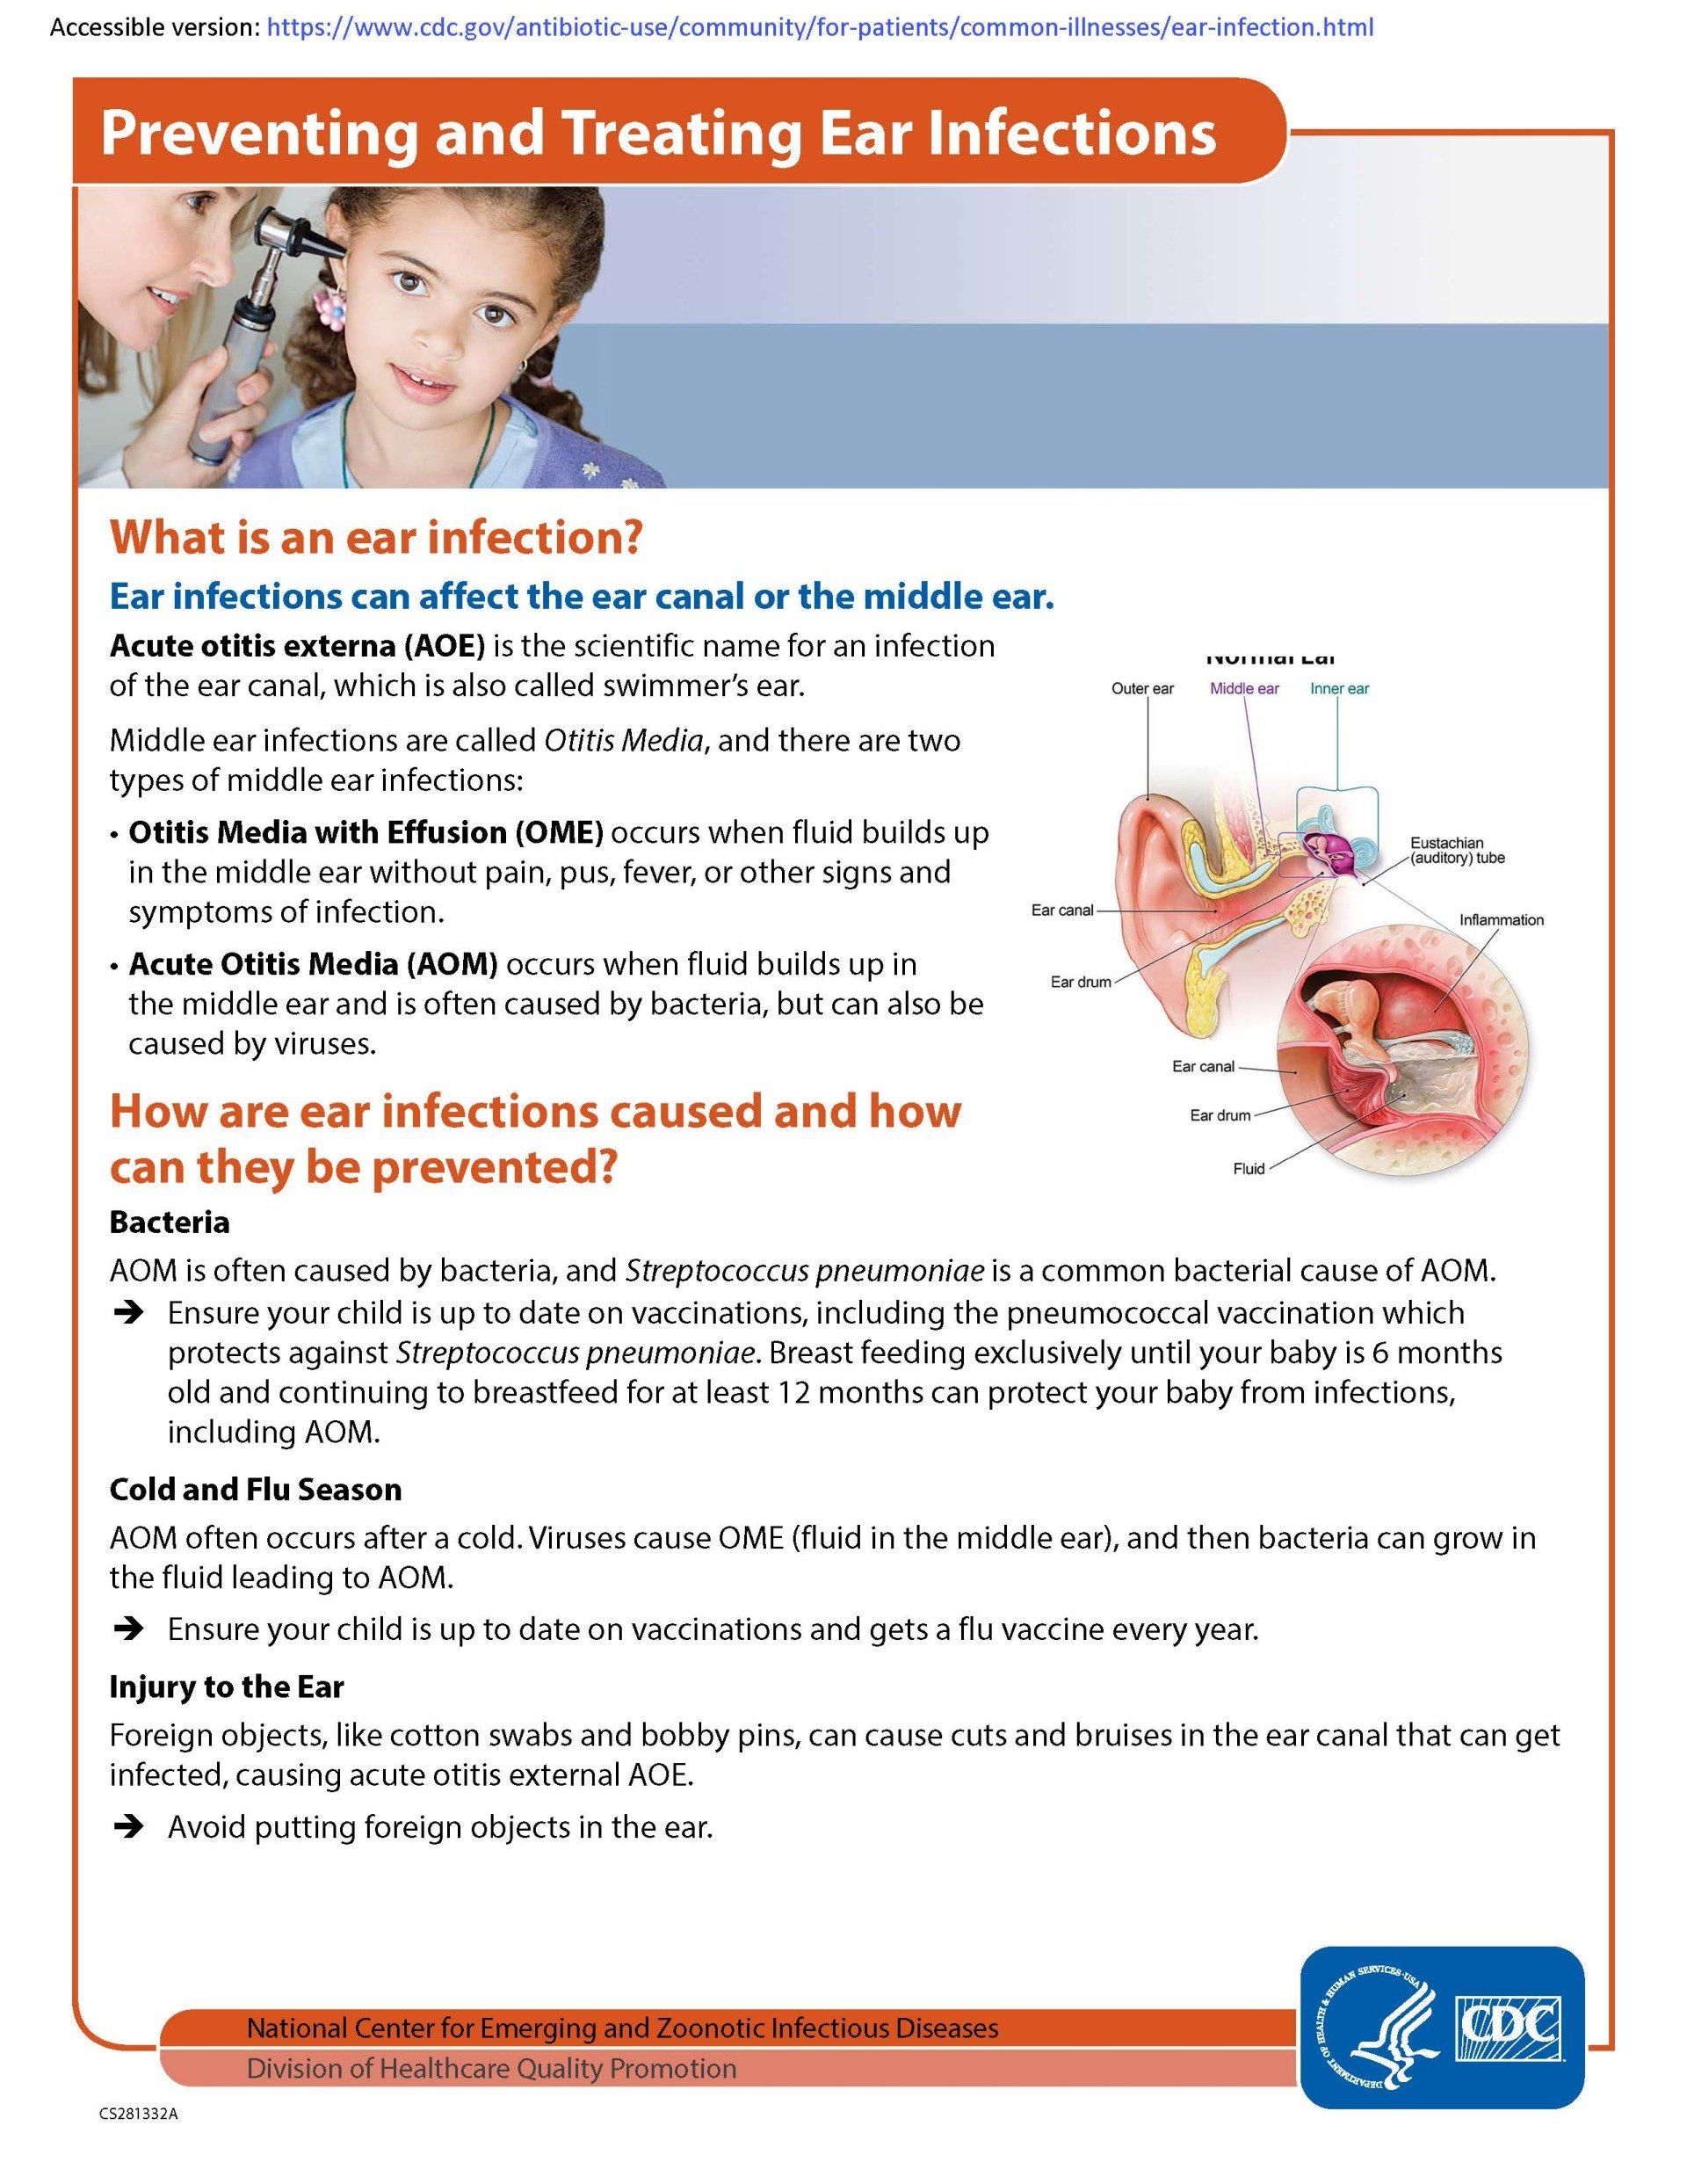 Preventing & Treating Ear Infections (page1)